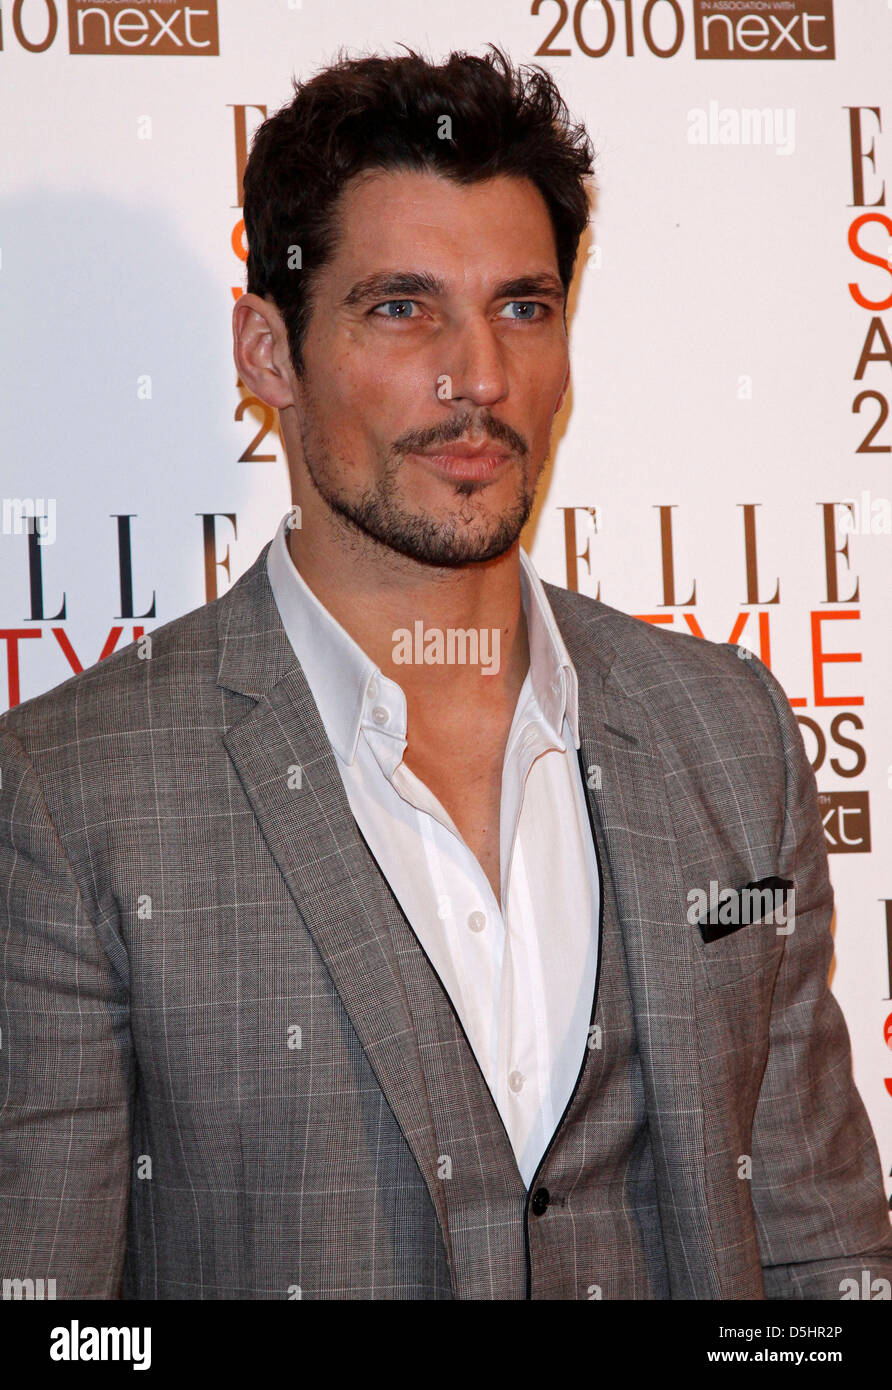 British model David Gandy arrives at the 2010 ELLE Style Awards at the Grand Connaught Rooms in London, Great Britain, 22 February 2010. The fashion magazine's annual award ceremony coincides with the London Fashion Week and recognizes personalities from the fashion and entertainment world. Photo: Hubert Boesl Stock Photo